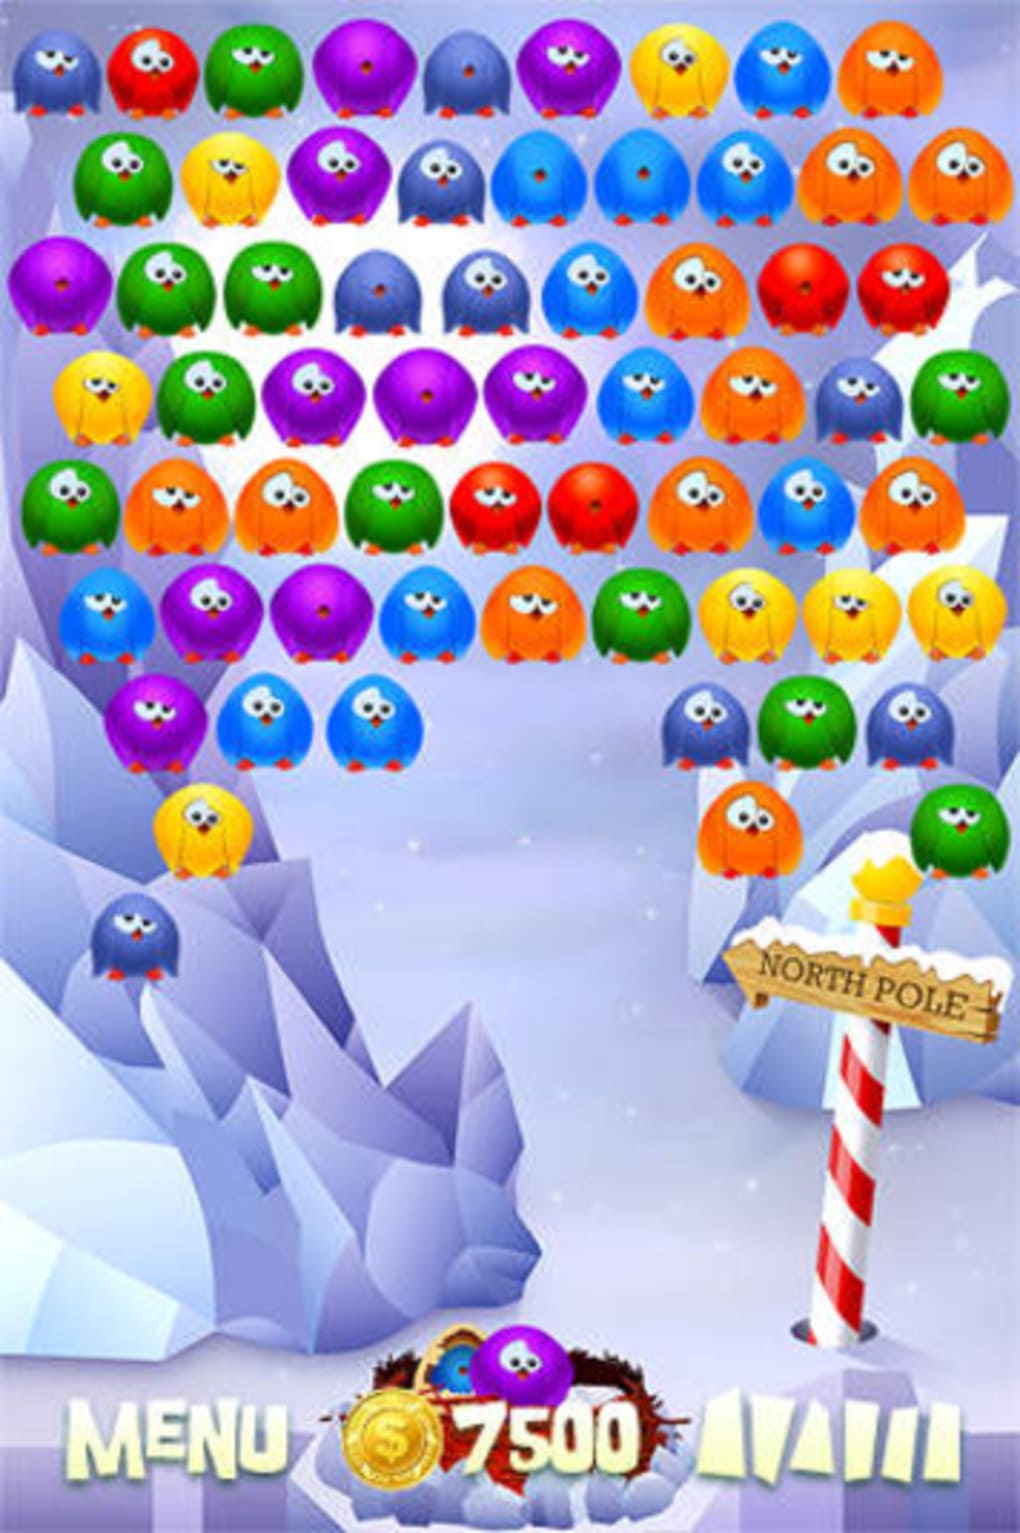 Bubble Birds HD for iPhone